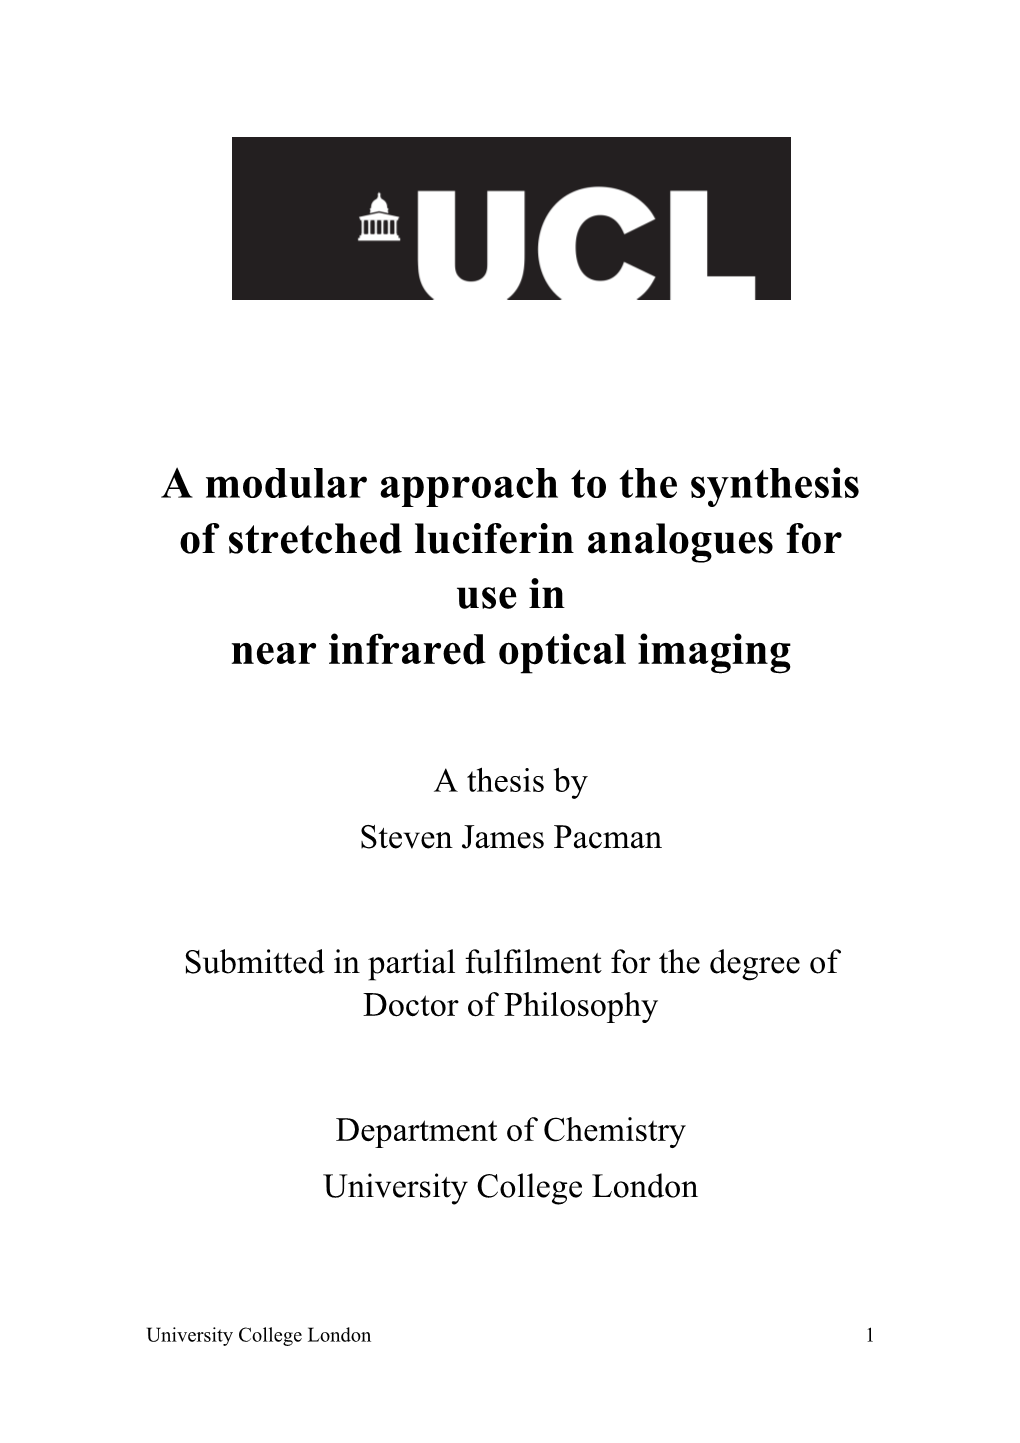 A Modular Approach to the Synthesis of Stretched Luciferin Analogues for Use in Near Infrared Optical Imaging